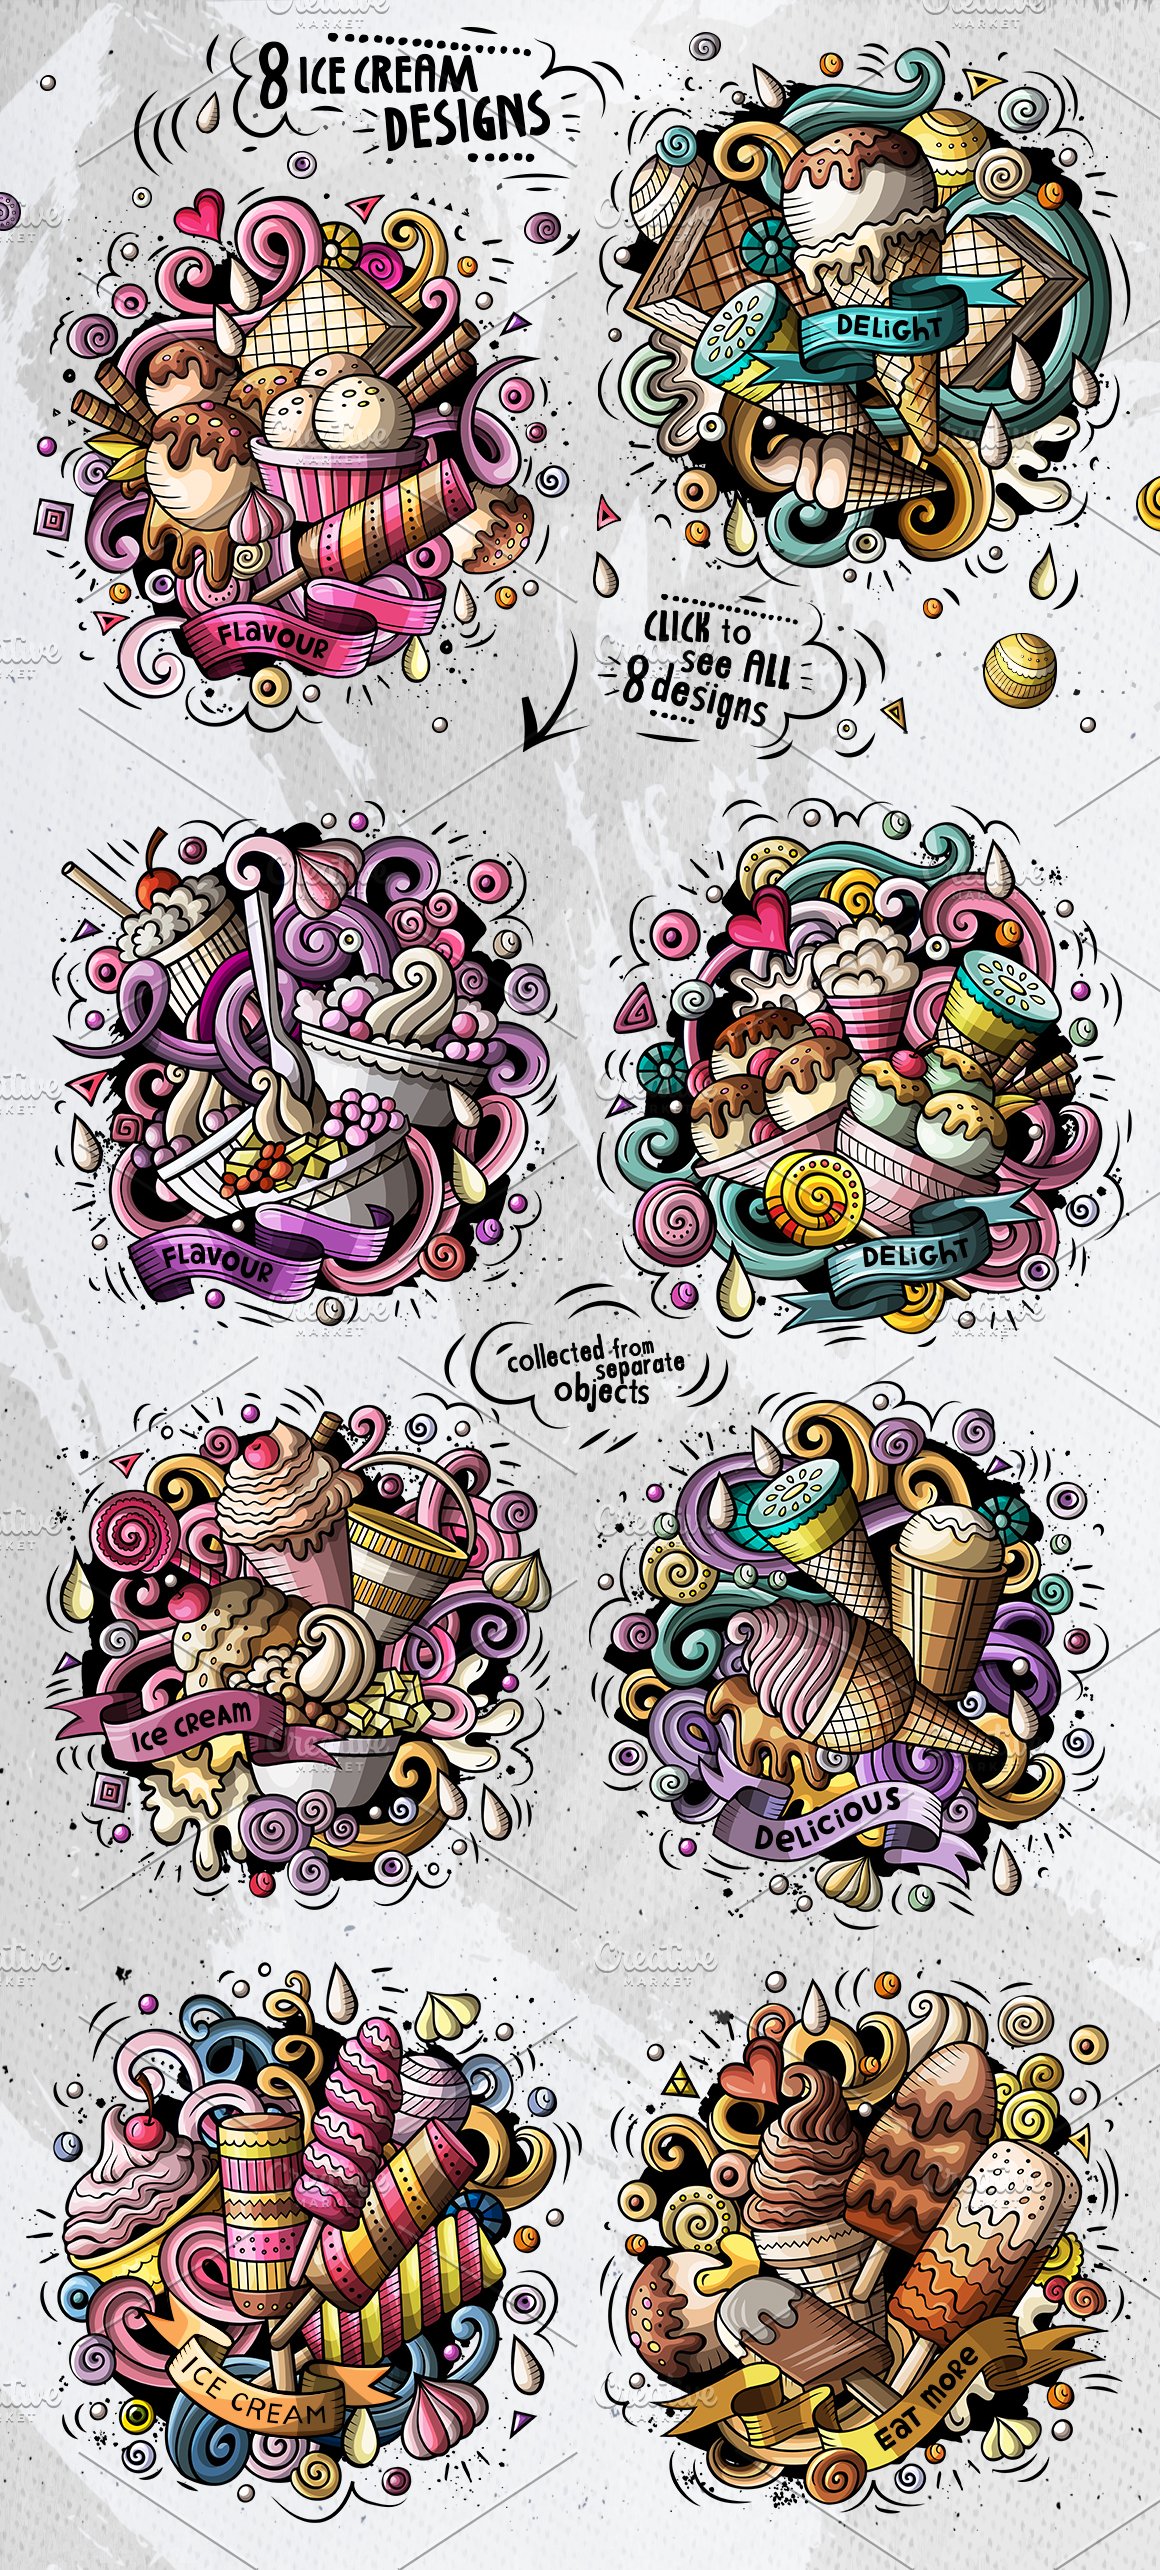 Grouping of drawings on the theme of ice cream in different colors.